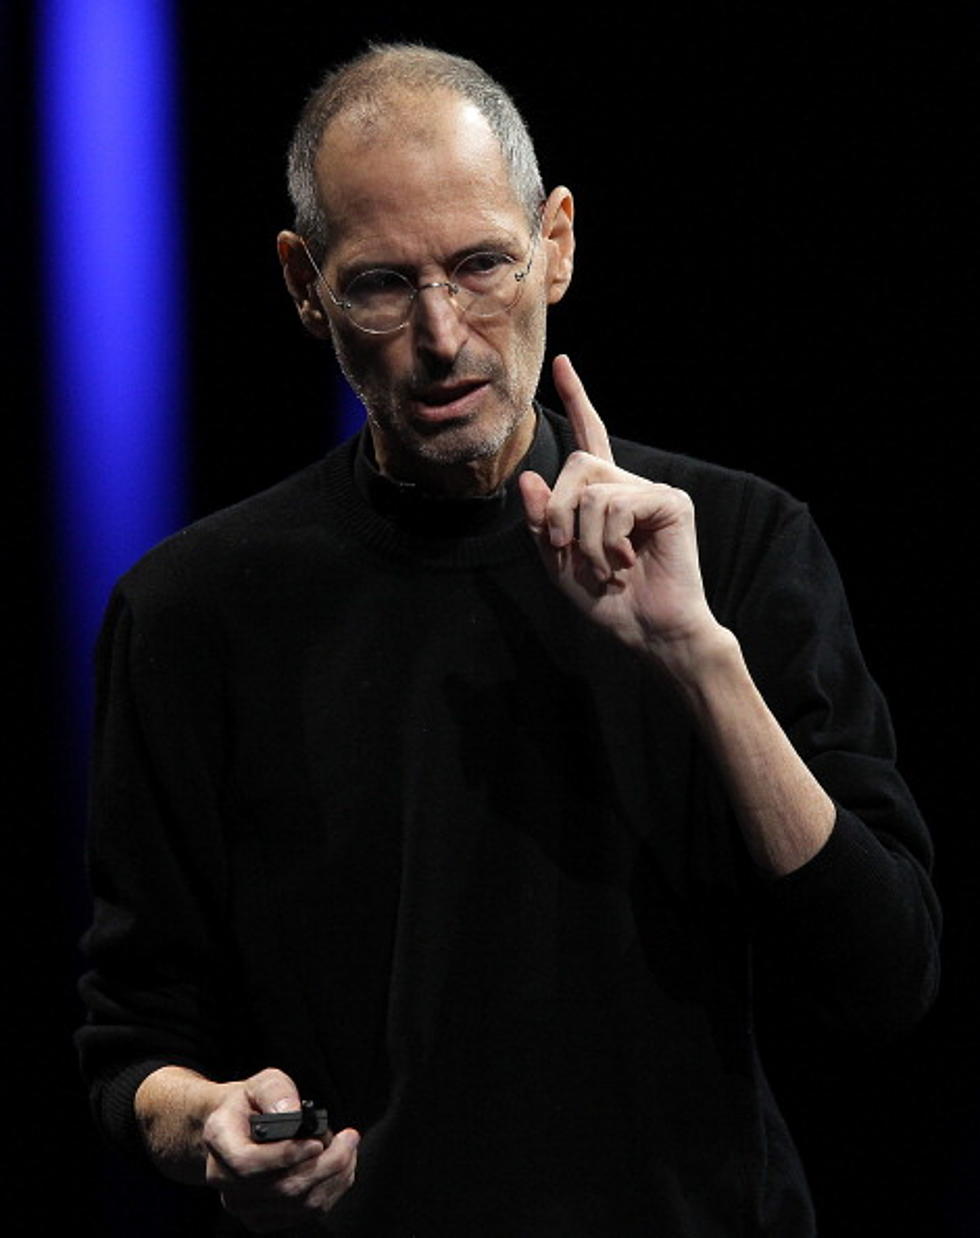 Steve Jobs Through the Years [PICTURES]